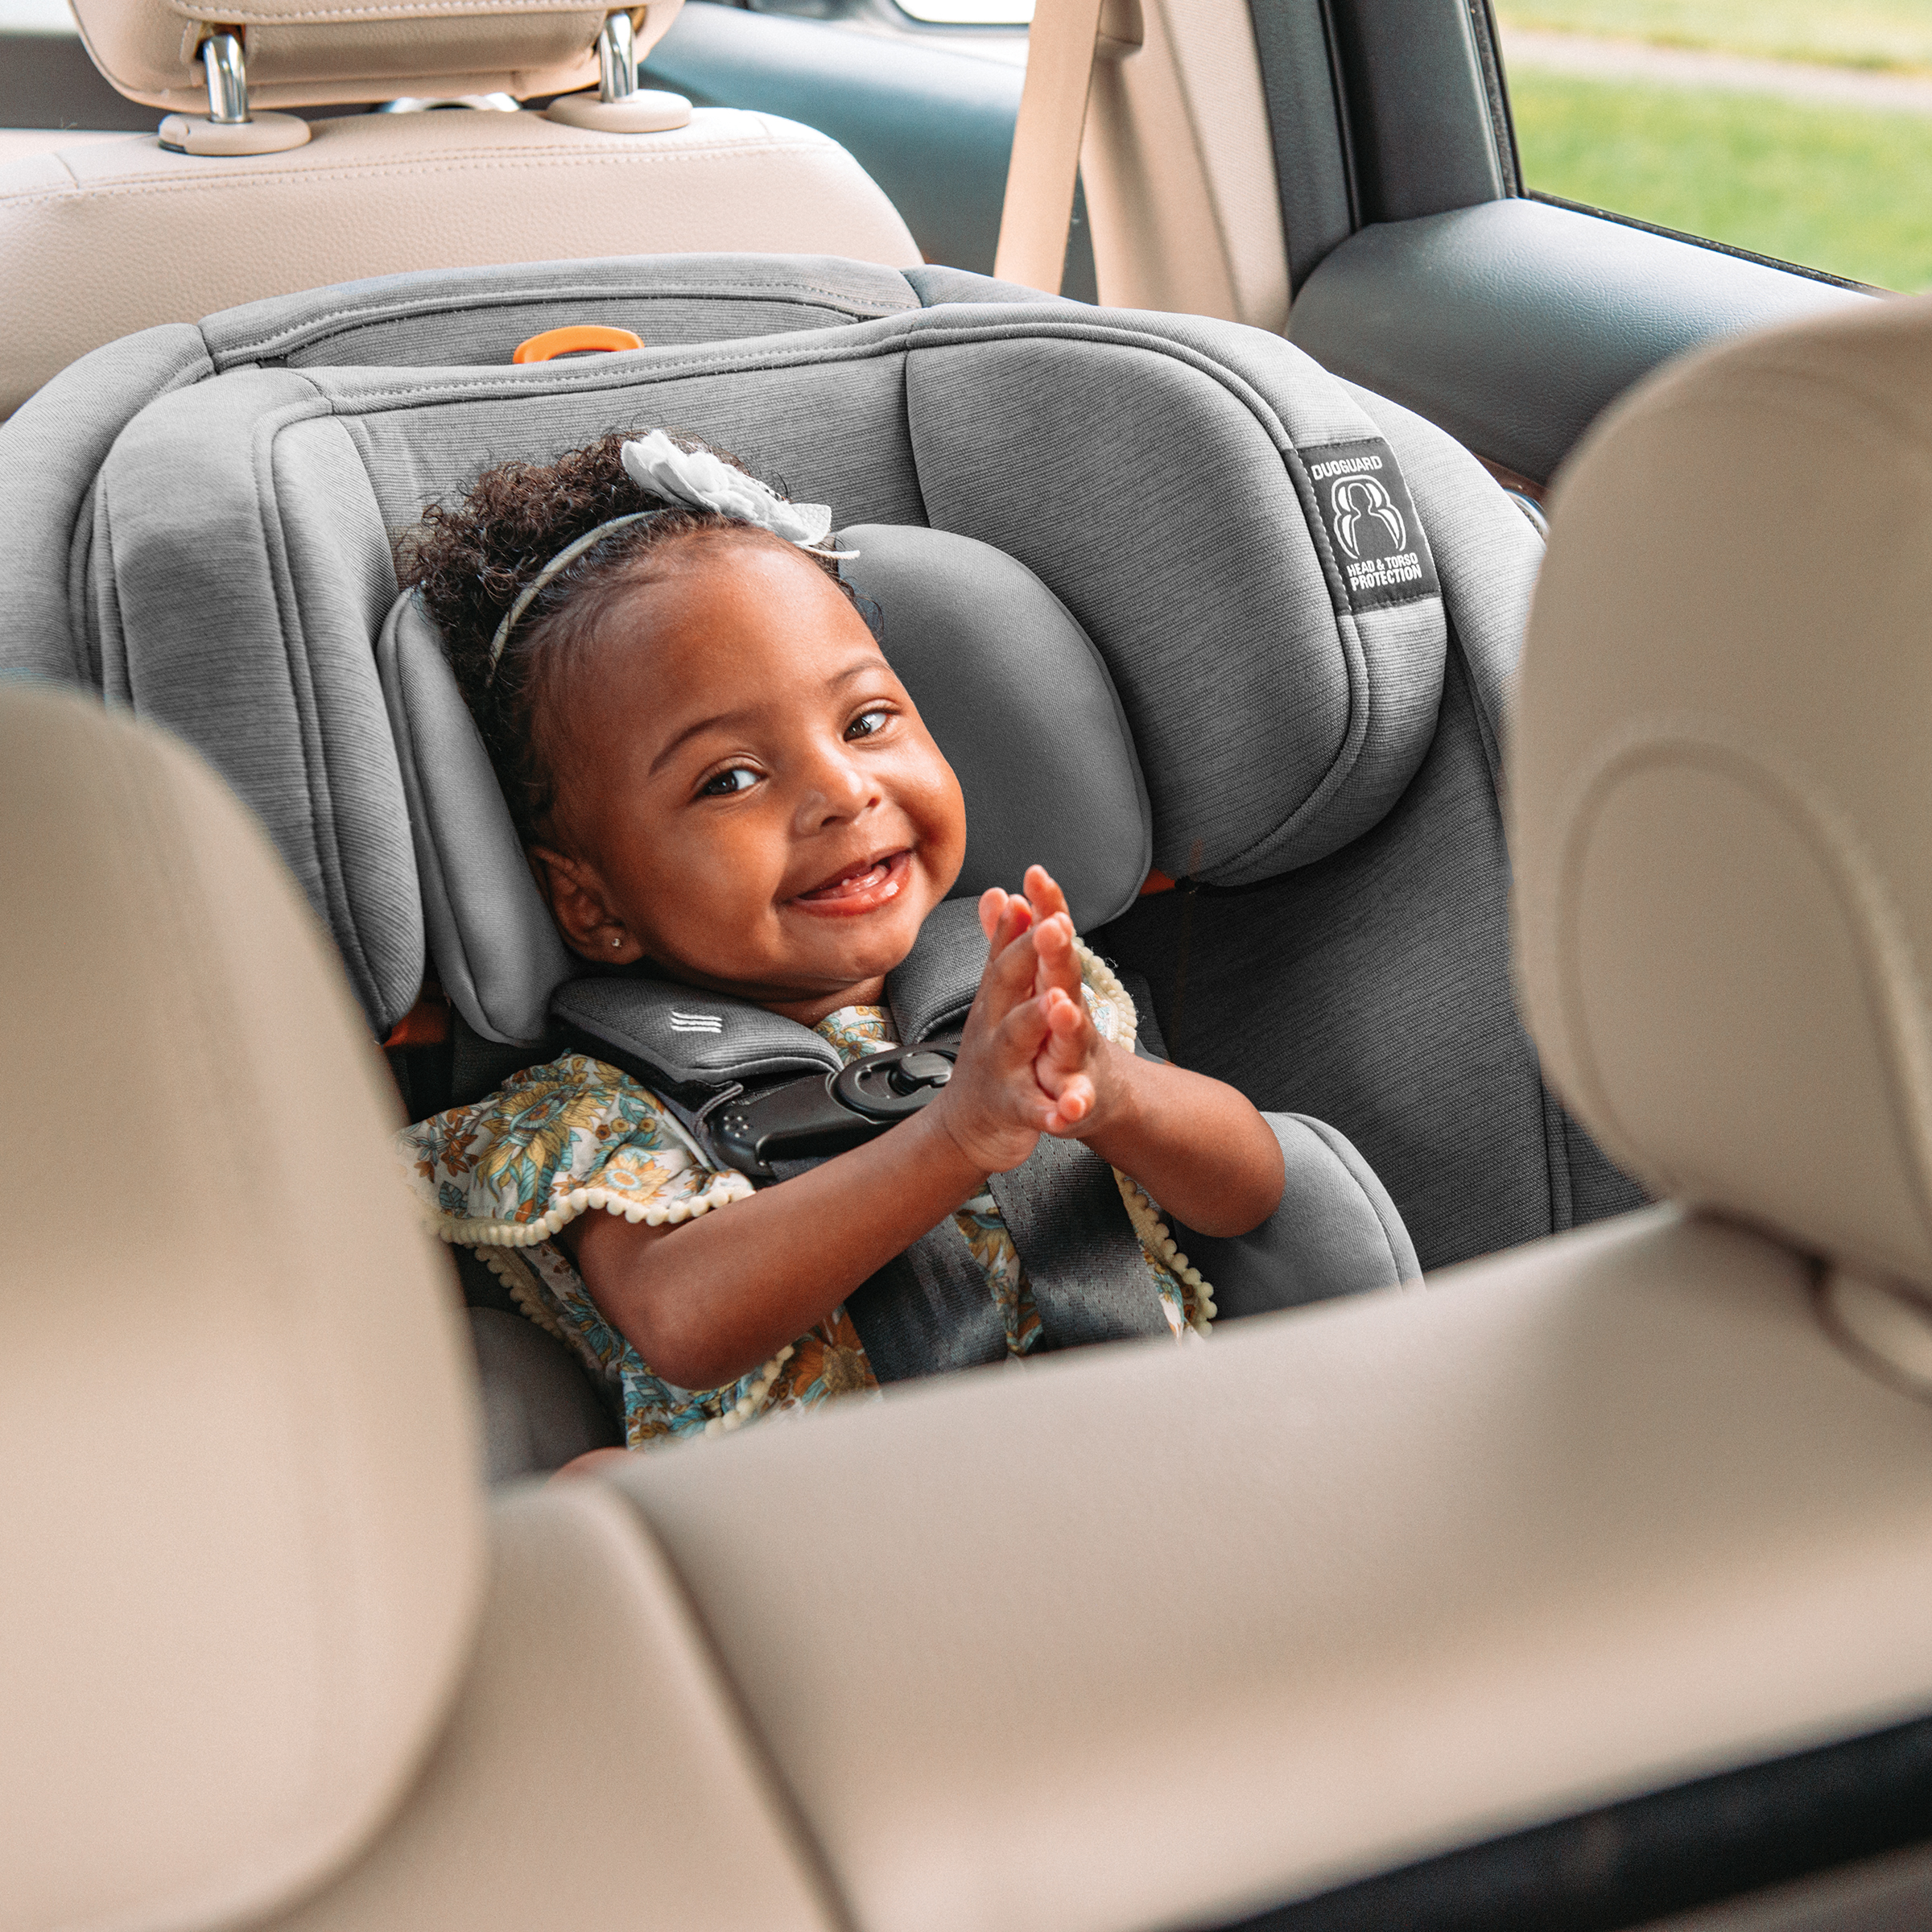 Data from new analysis reveals nearly half of children injured in a car crash were not in a car seat